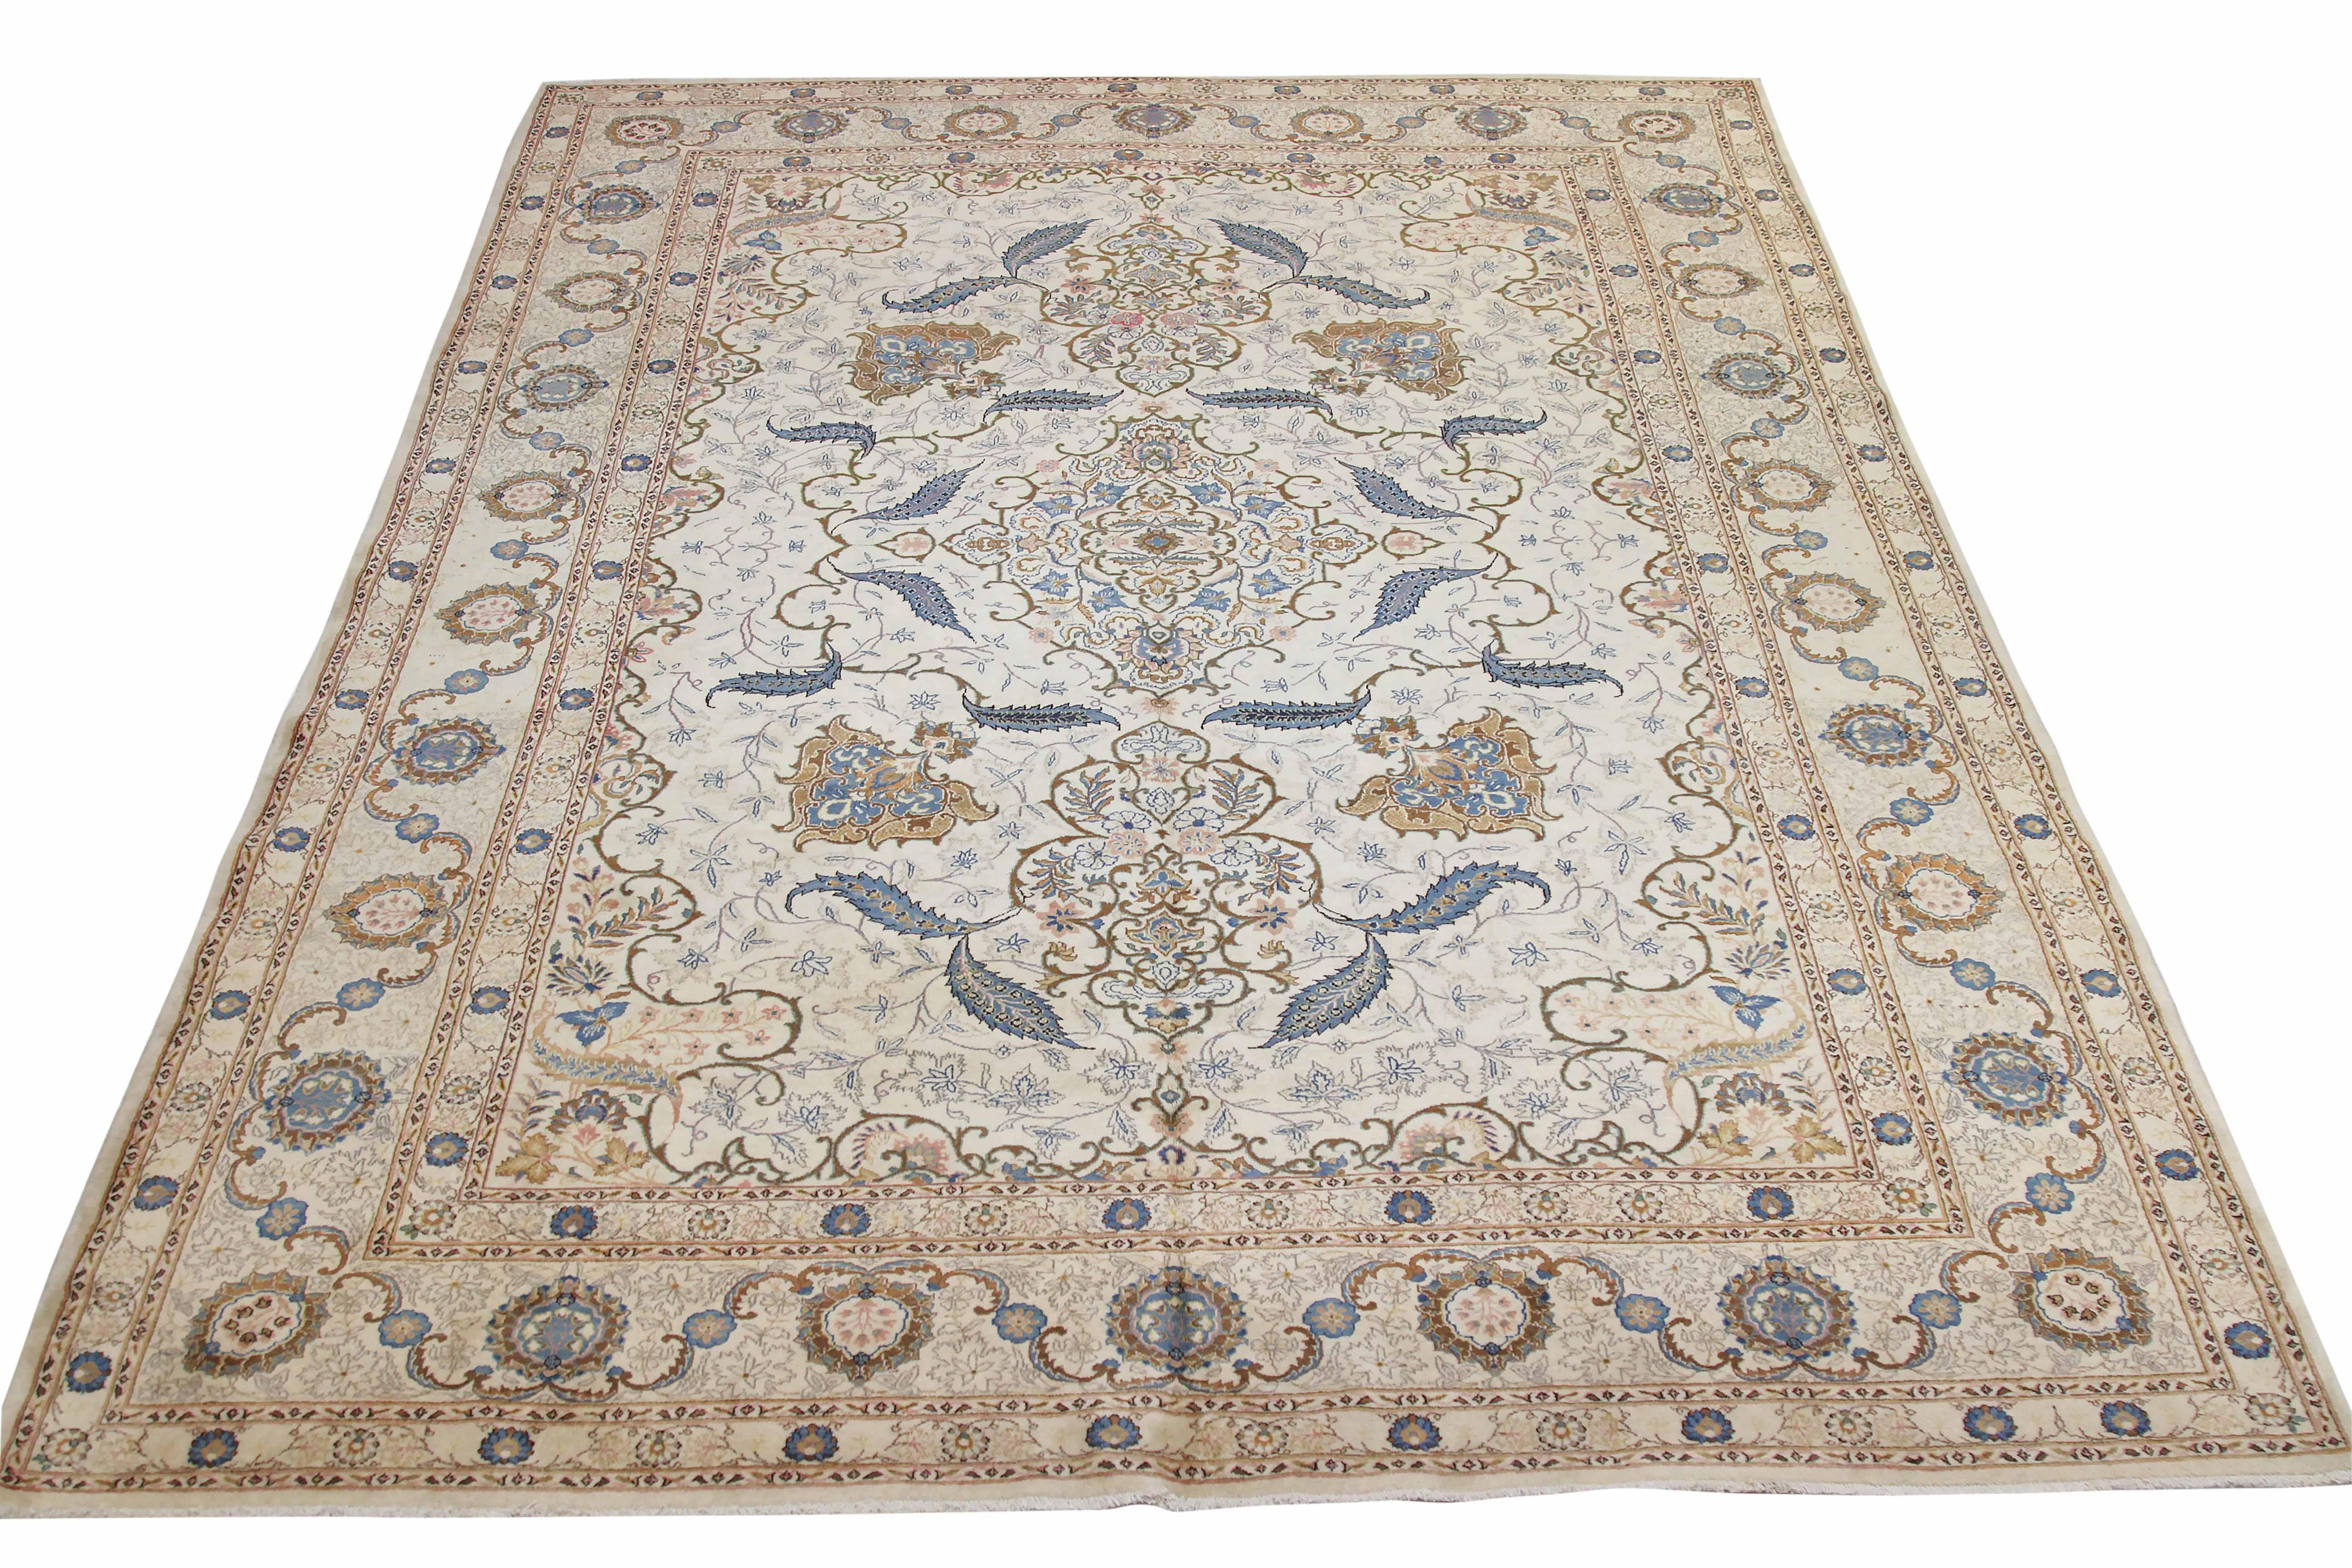 Antique Persian Kashan Area Rug, handcrafted from premium quality sheep's wool and dyed using all-natural vegetable dyes that are safe for humans and pets. This traditional Kashan design, woven by skilled artisans, adds a touch of elegance to any